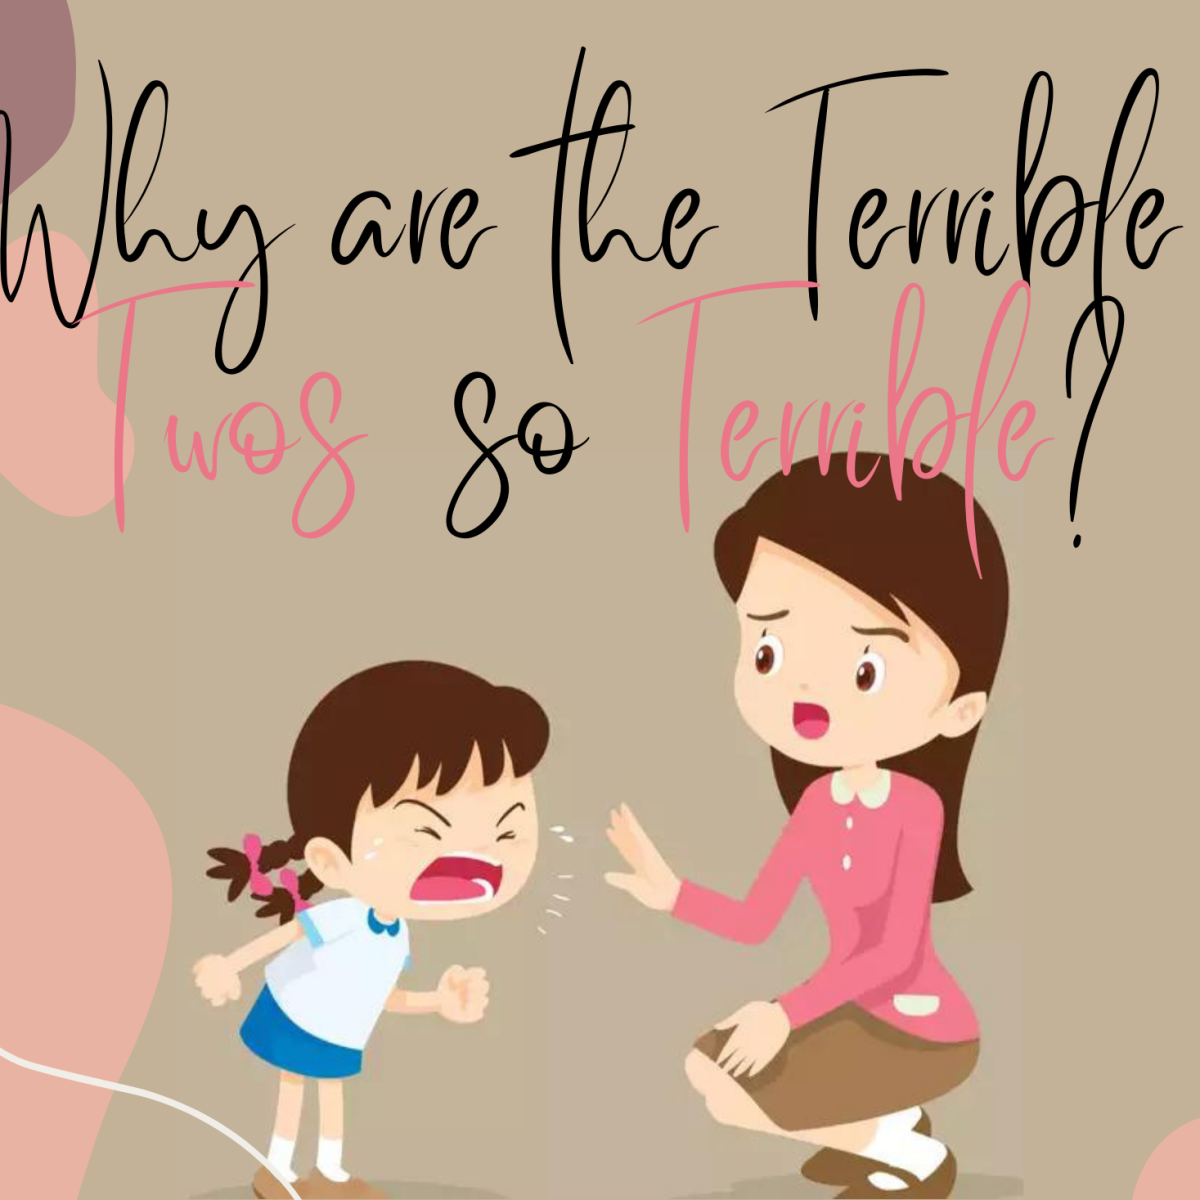 What is so Terrible about the Terrible Twos?